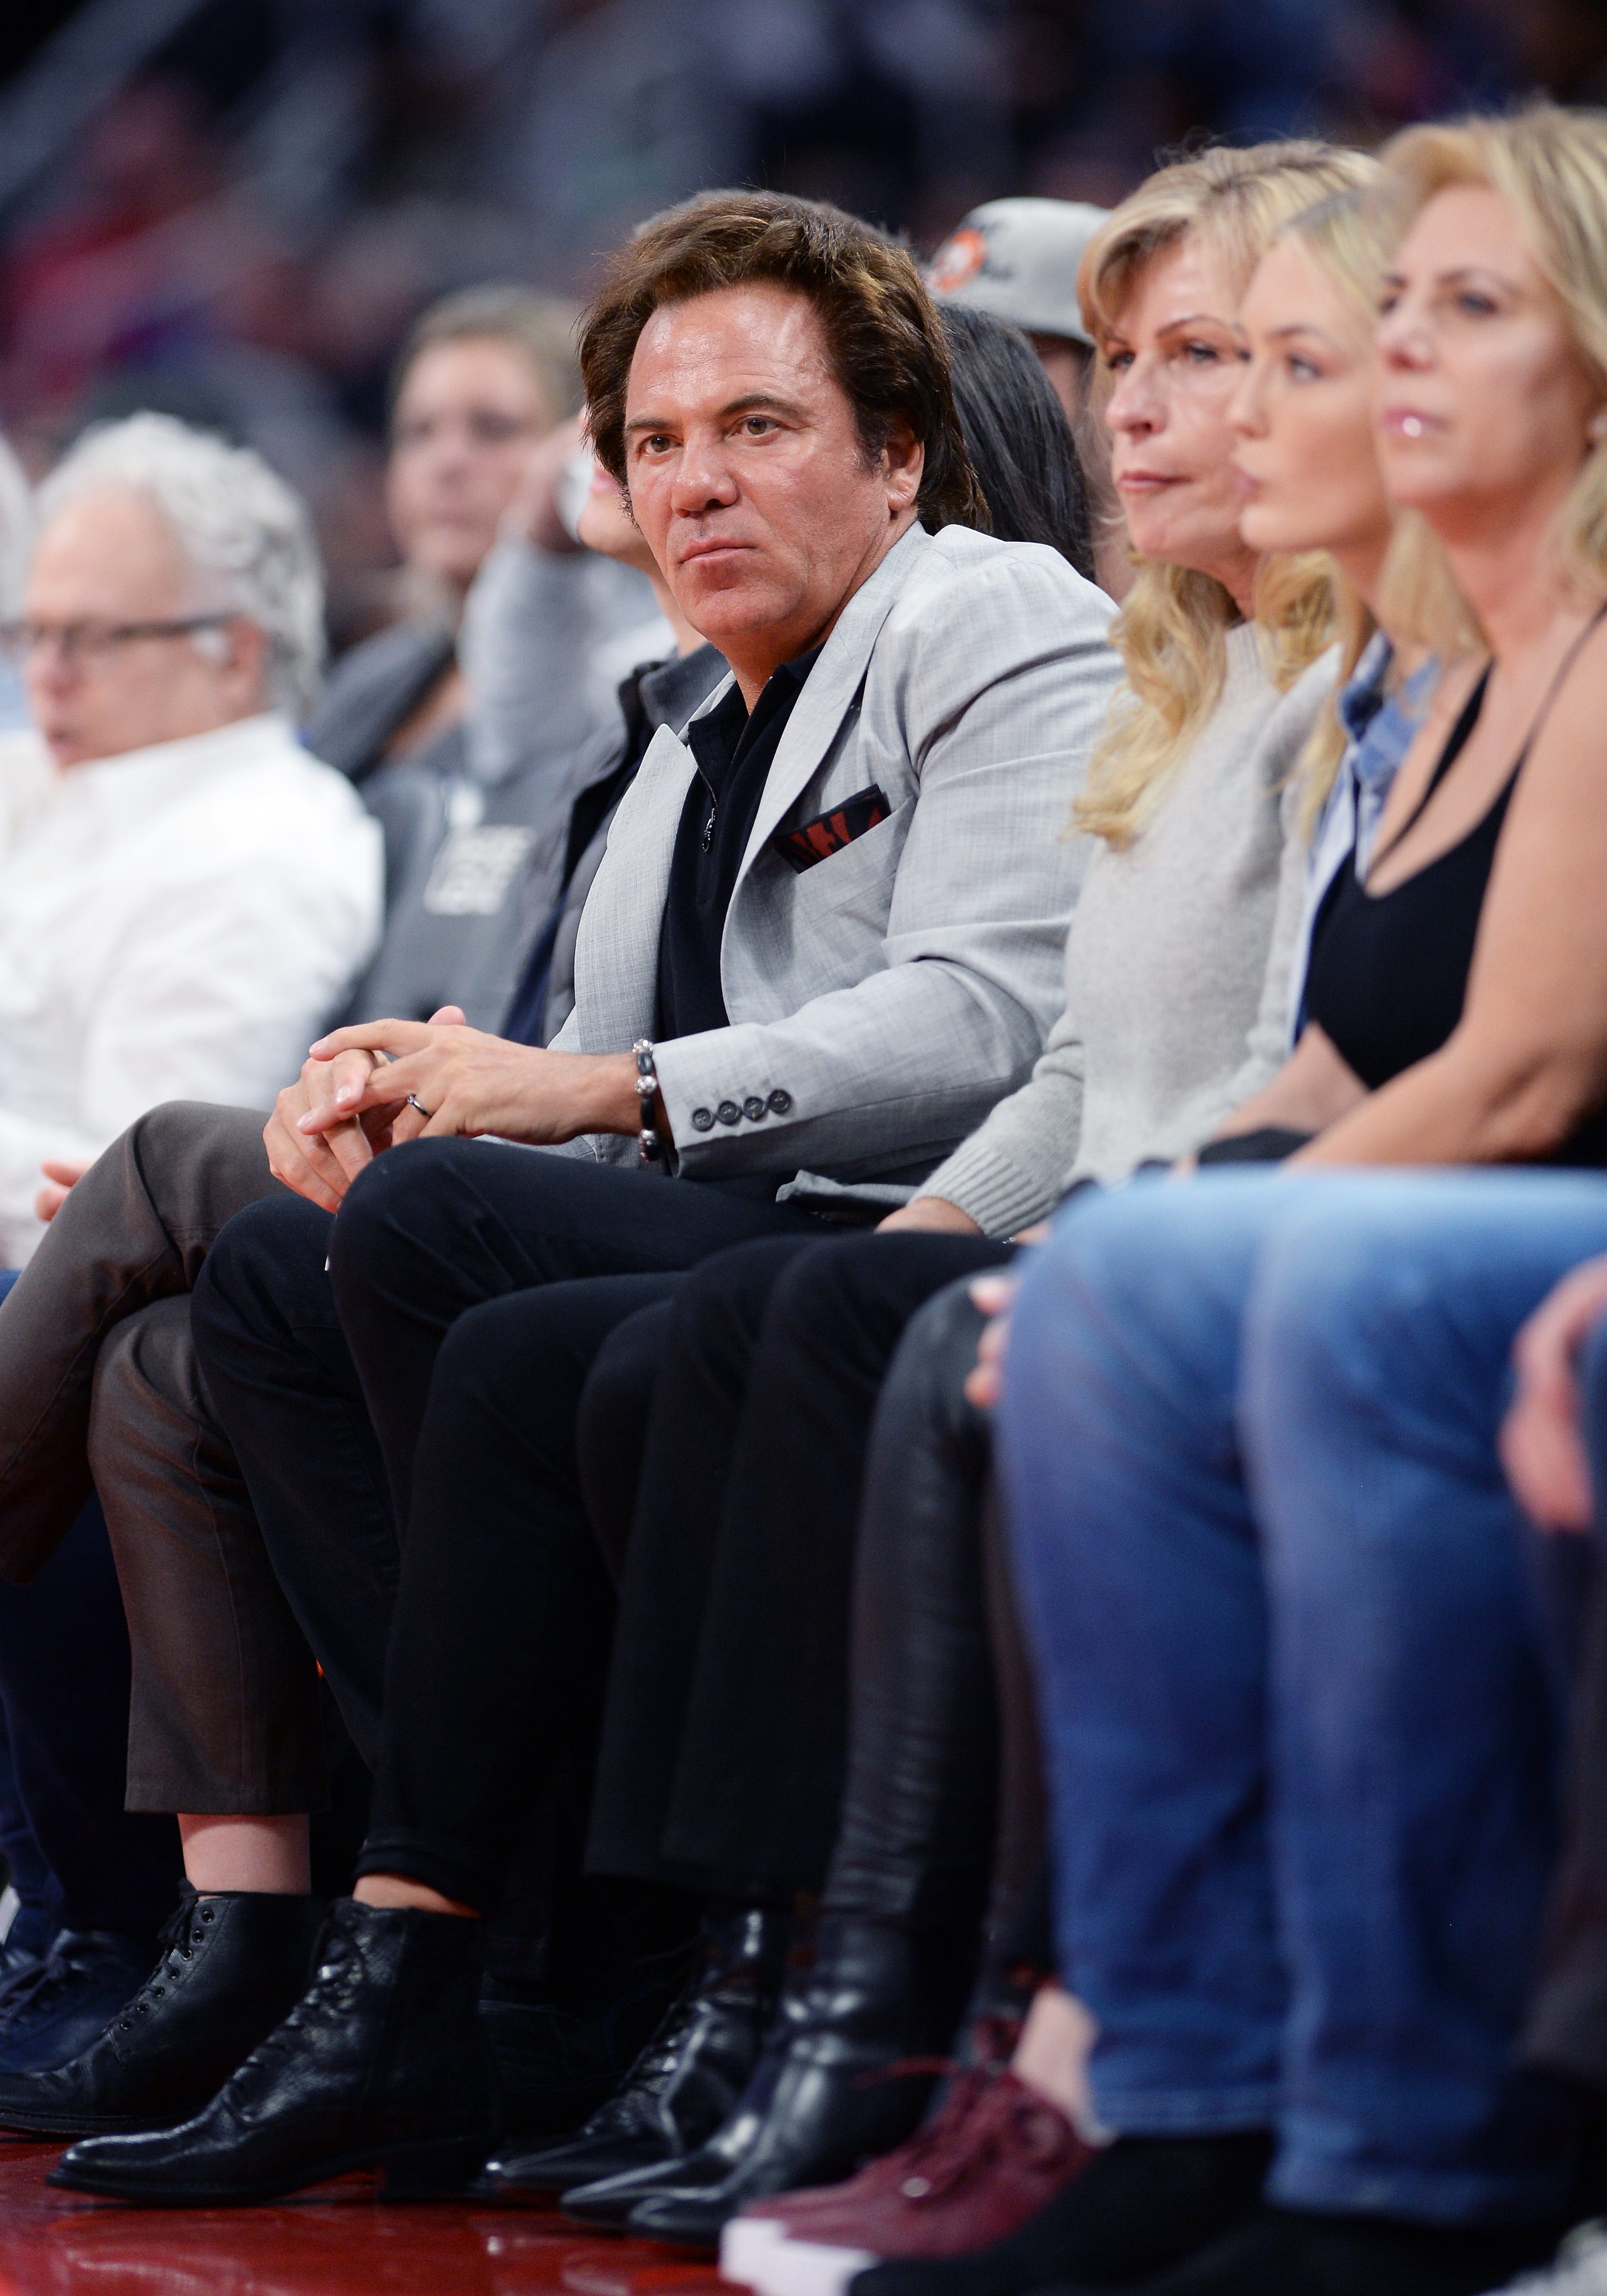 Pistons owner Tom Gores watches the action in the second quarter.